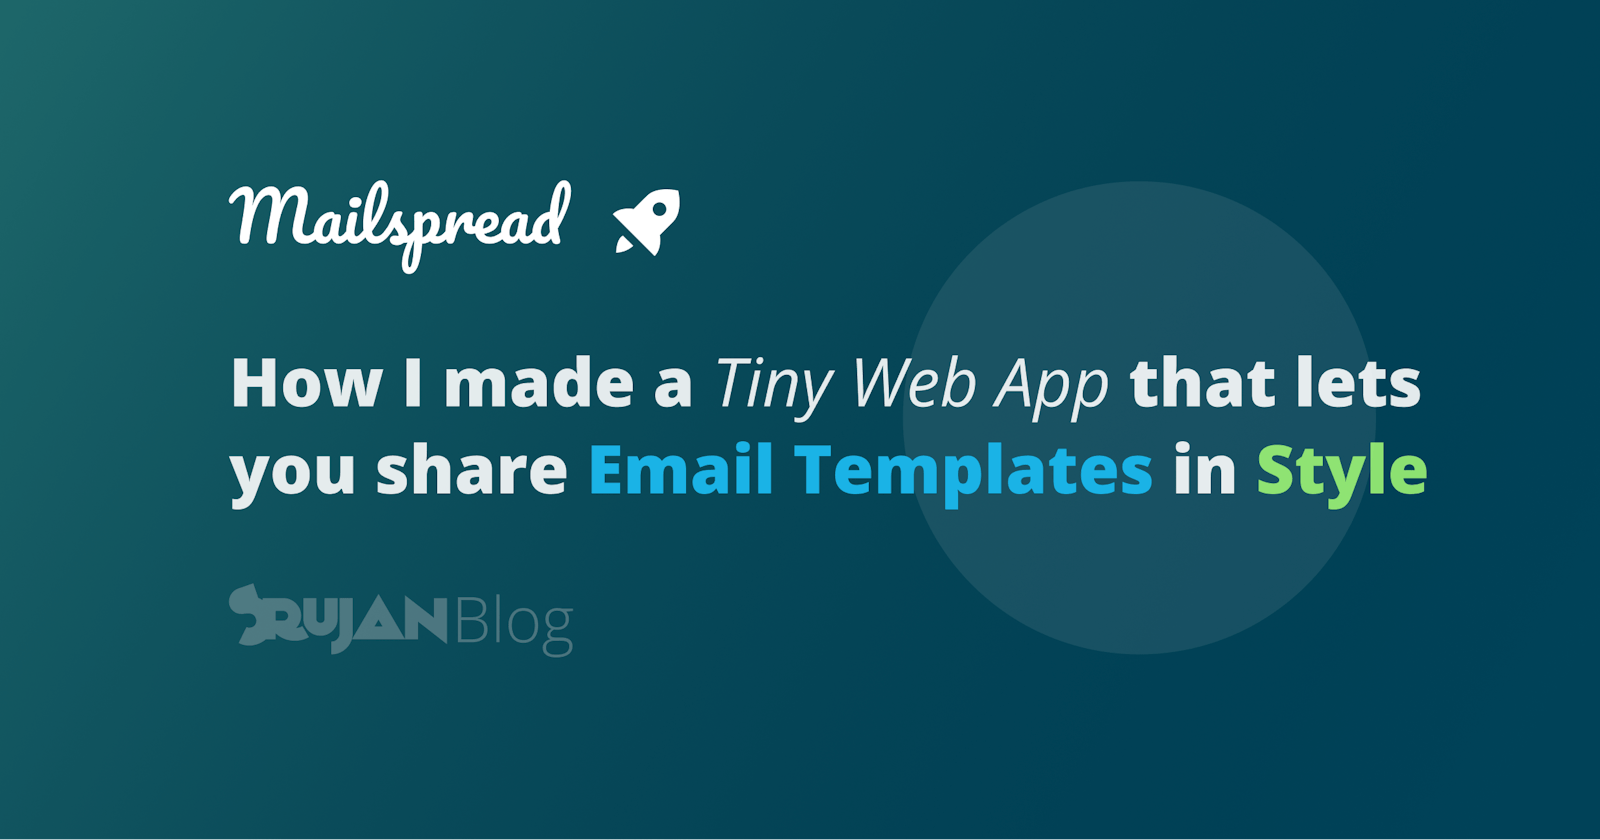 How I made a Tiny Web App that lets you share Email Templates in Style